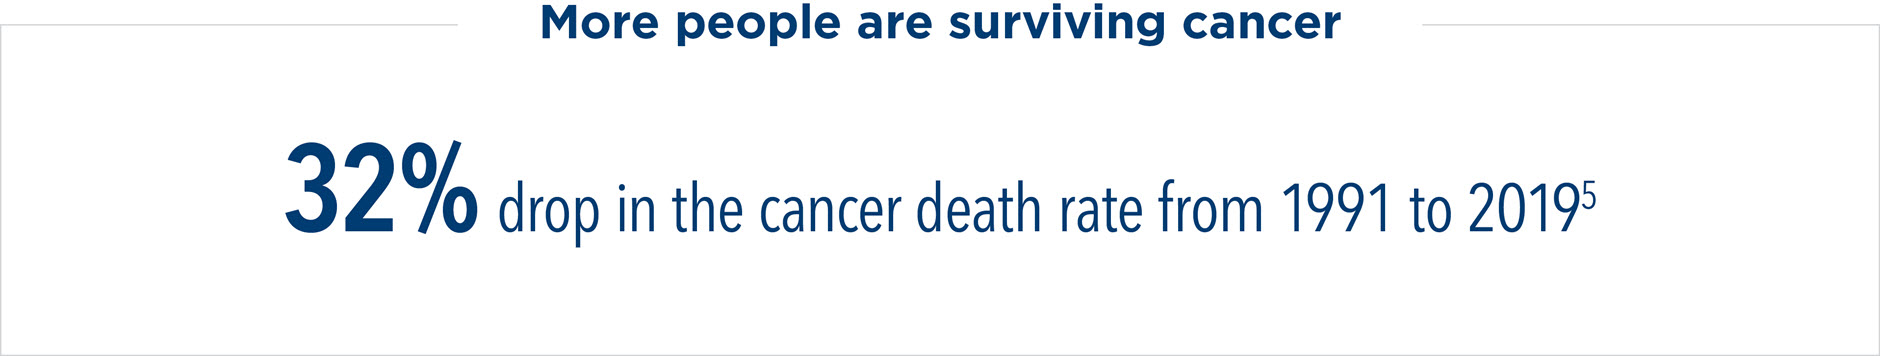 More people are surviving cancer — the cancer death rate dropped 32% from 1991 to 2019